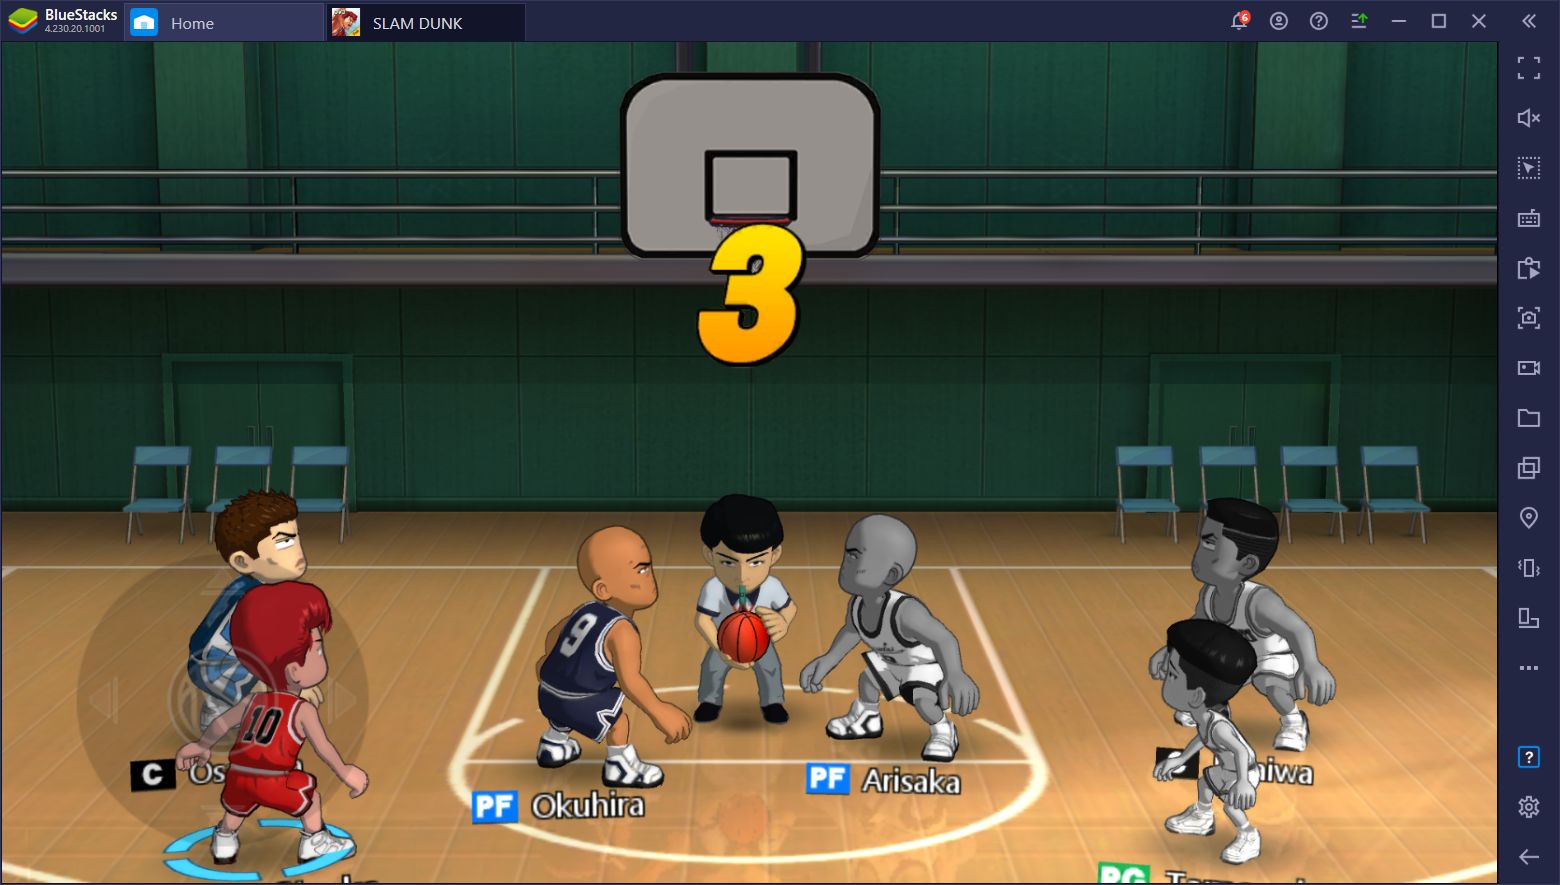 The Slam Dunk Mobile Basketball Game Just Released And You can Play It on PC With BlueStacks